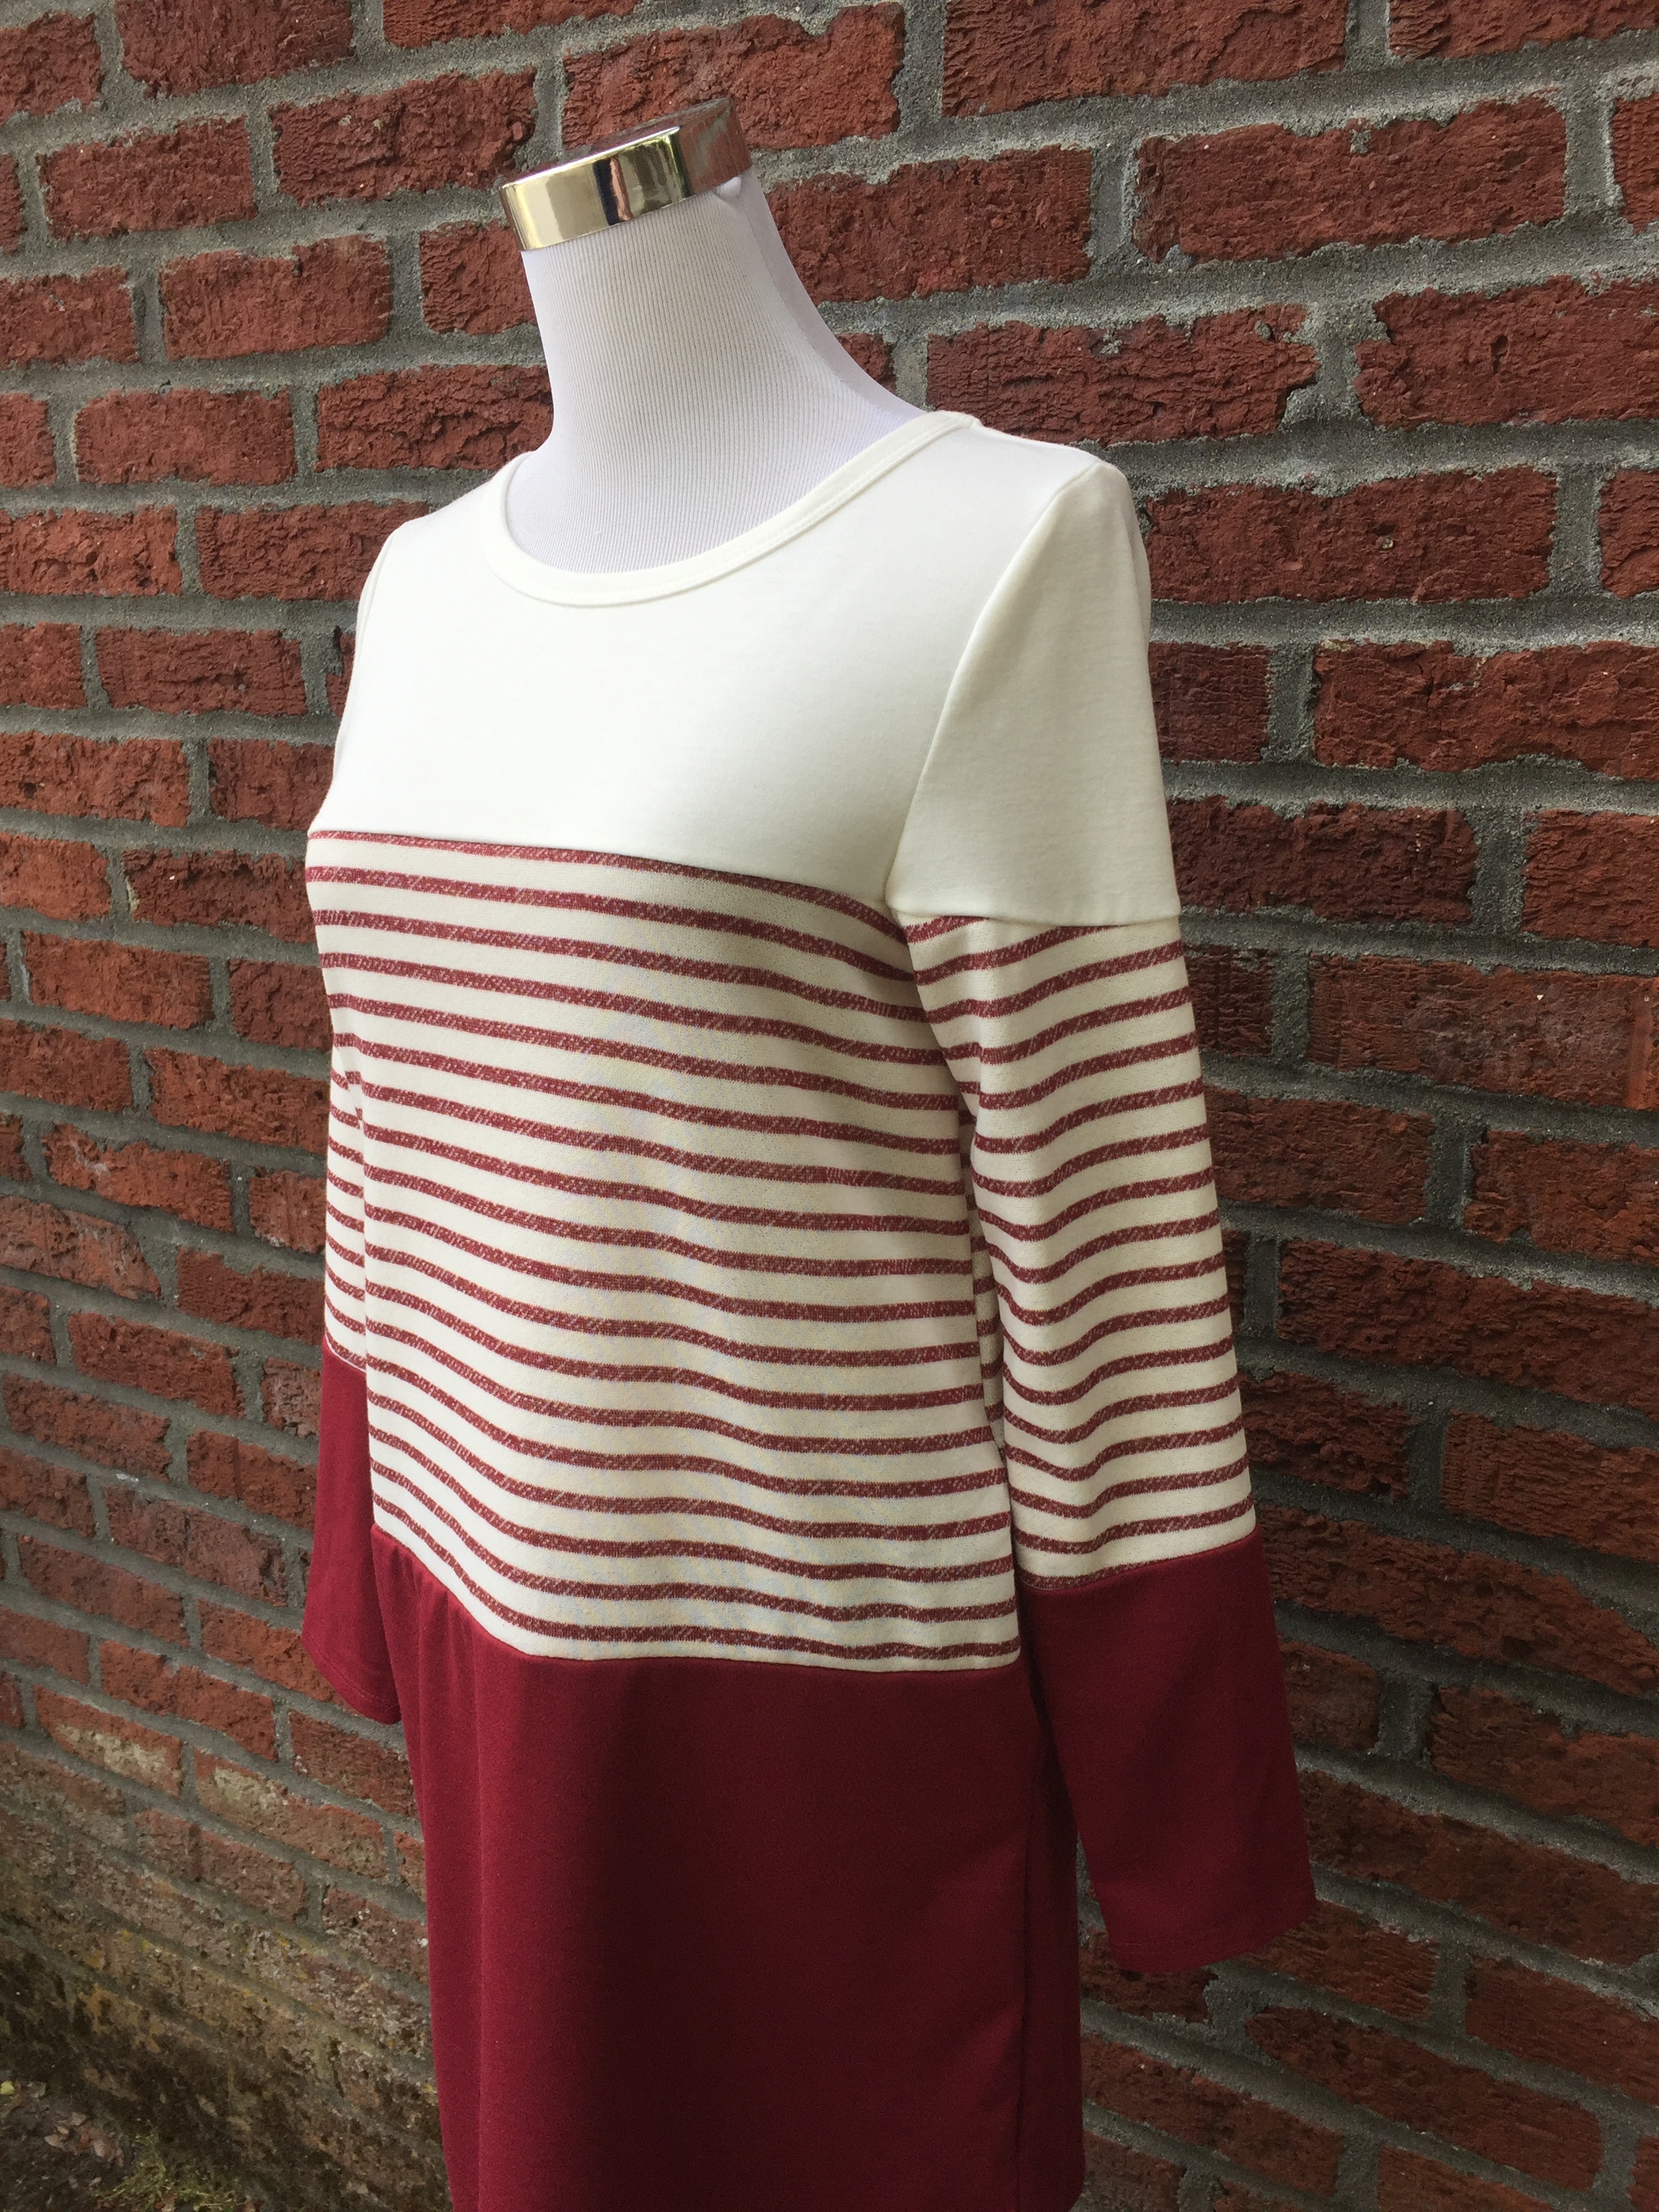 Hailey & Co striped tunic ($42, black and red)